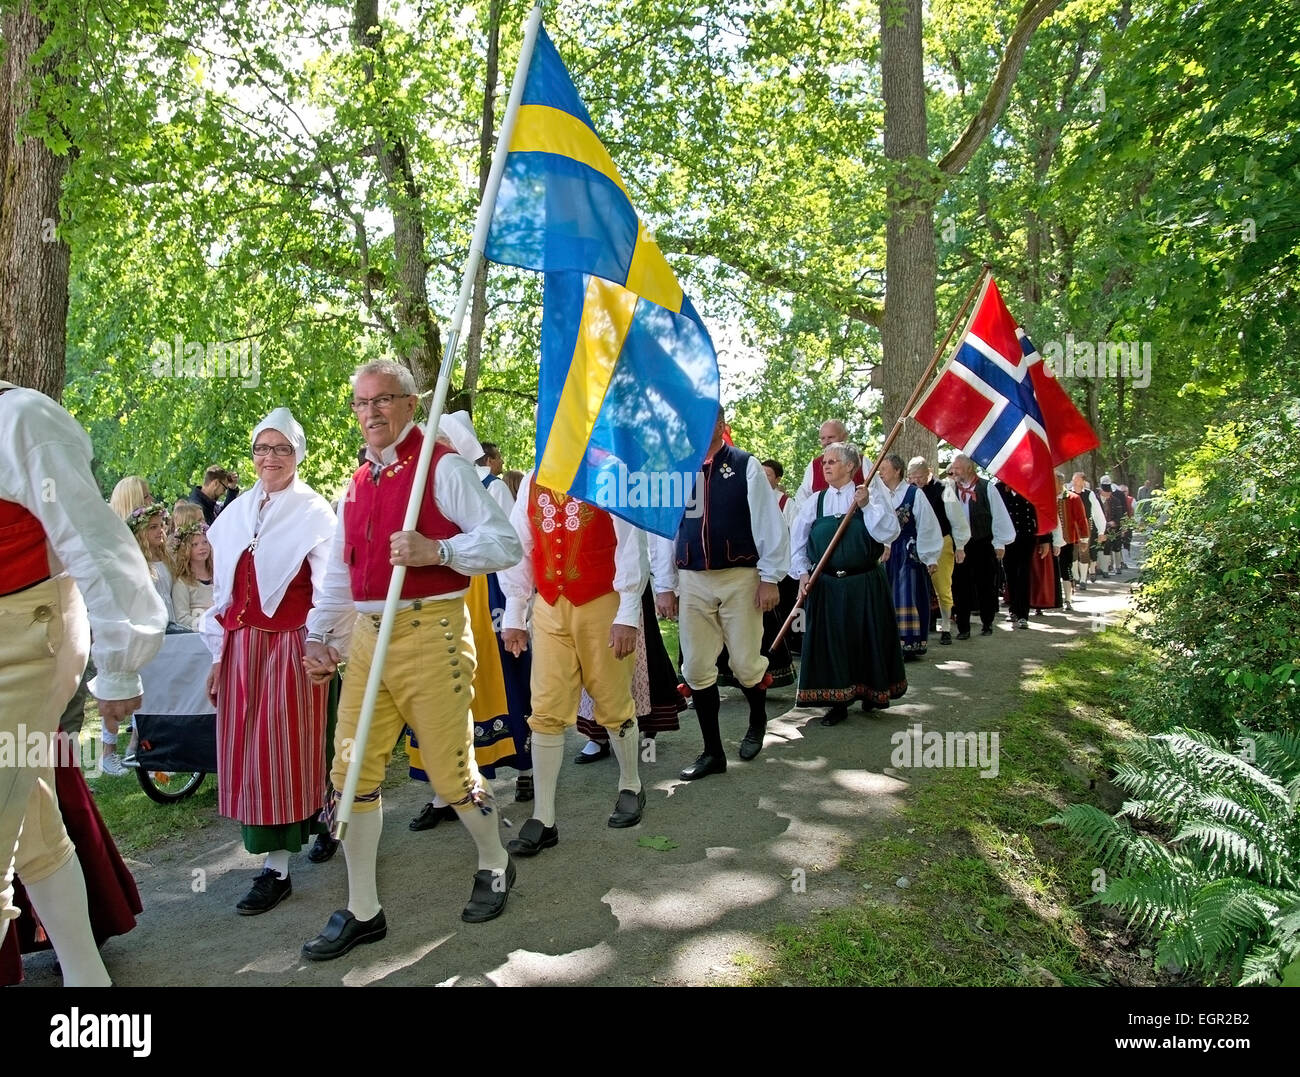 ALSTER, KARLSTAD, SWEDEN - JUNE 20, 2014: People at Midsummer celebrations and Norwegian - Swedish wedding on June 20, 2014 in A Stock Photo